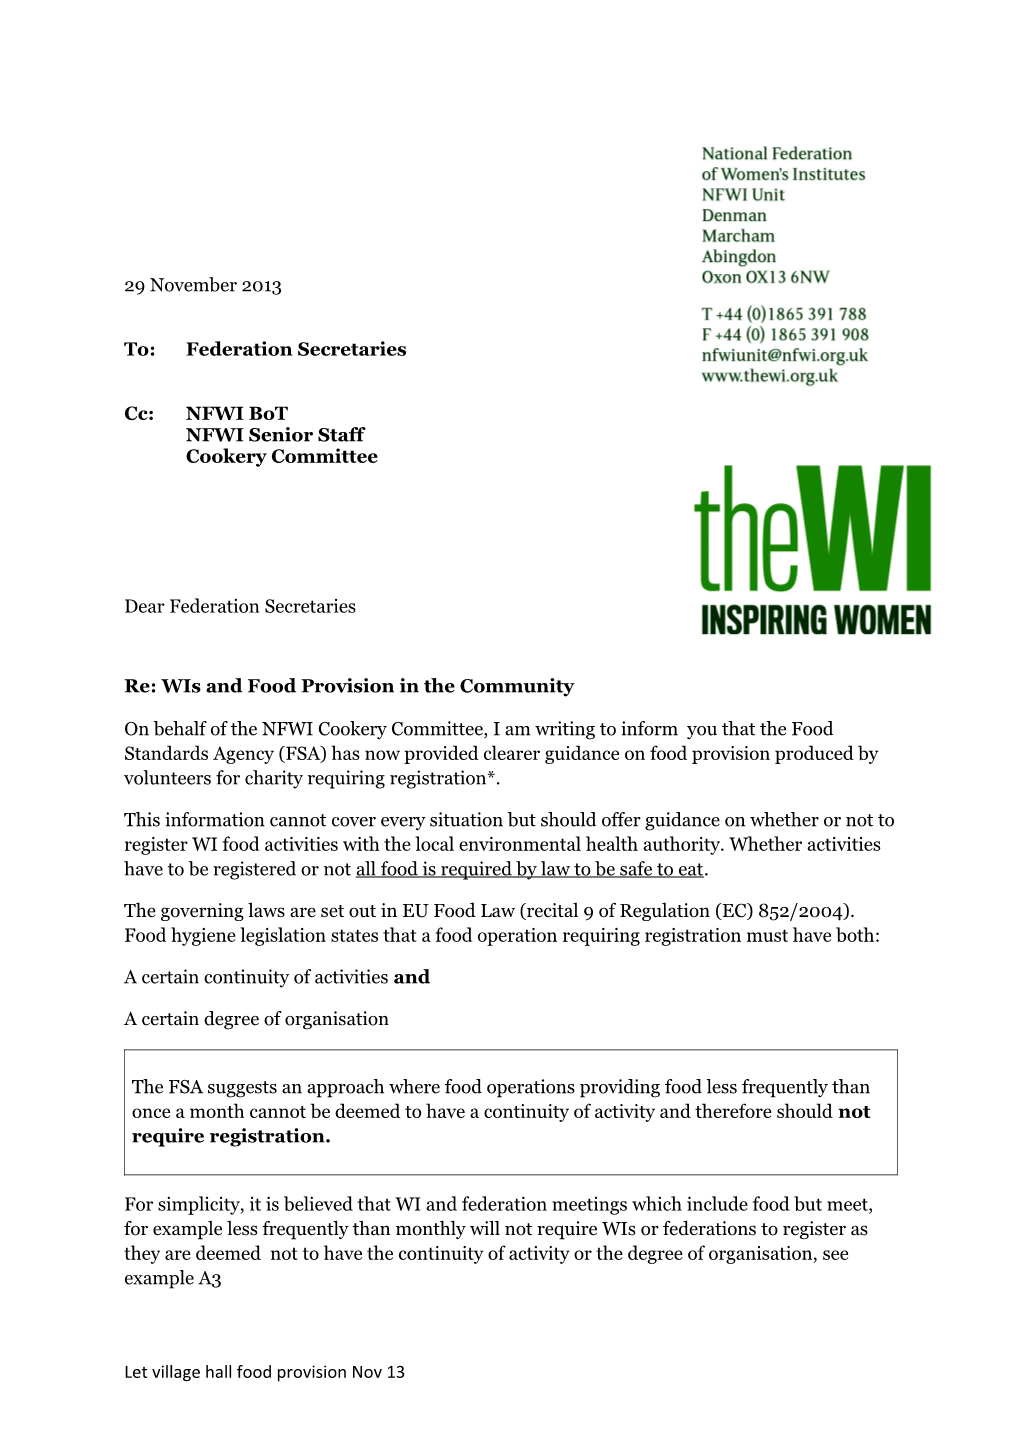 Re: Wis and Food Provision in the Community